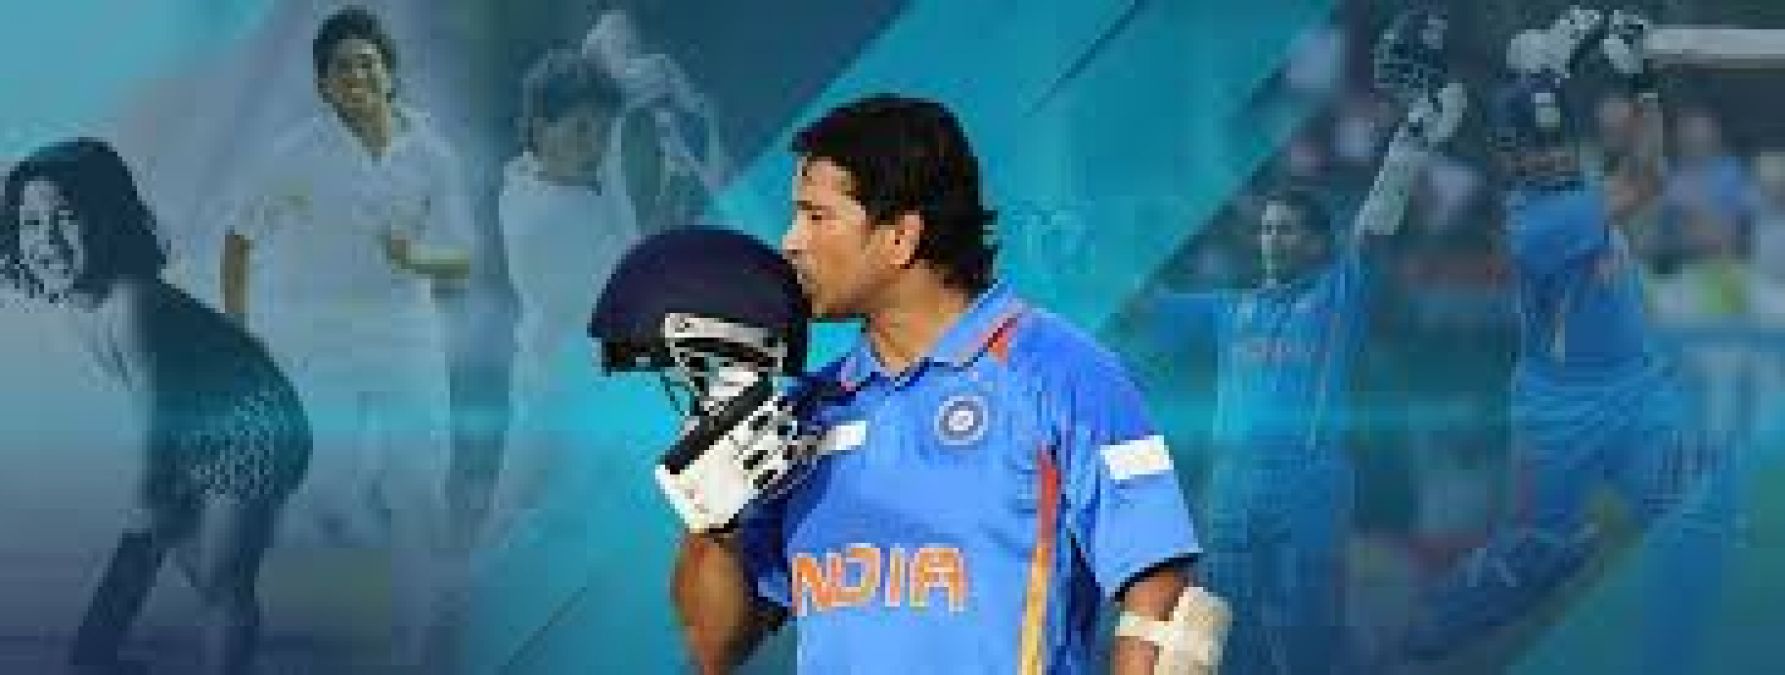 Know why Sachin asked for paratha from Yuvi